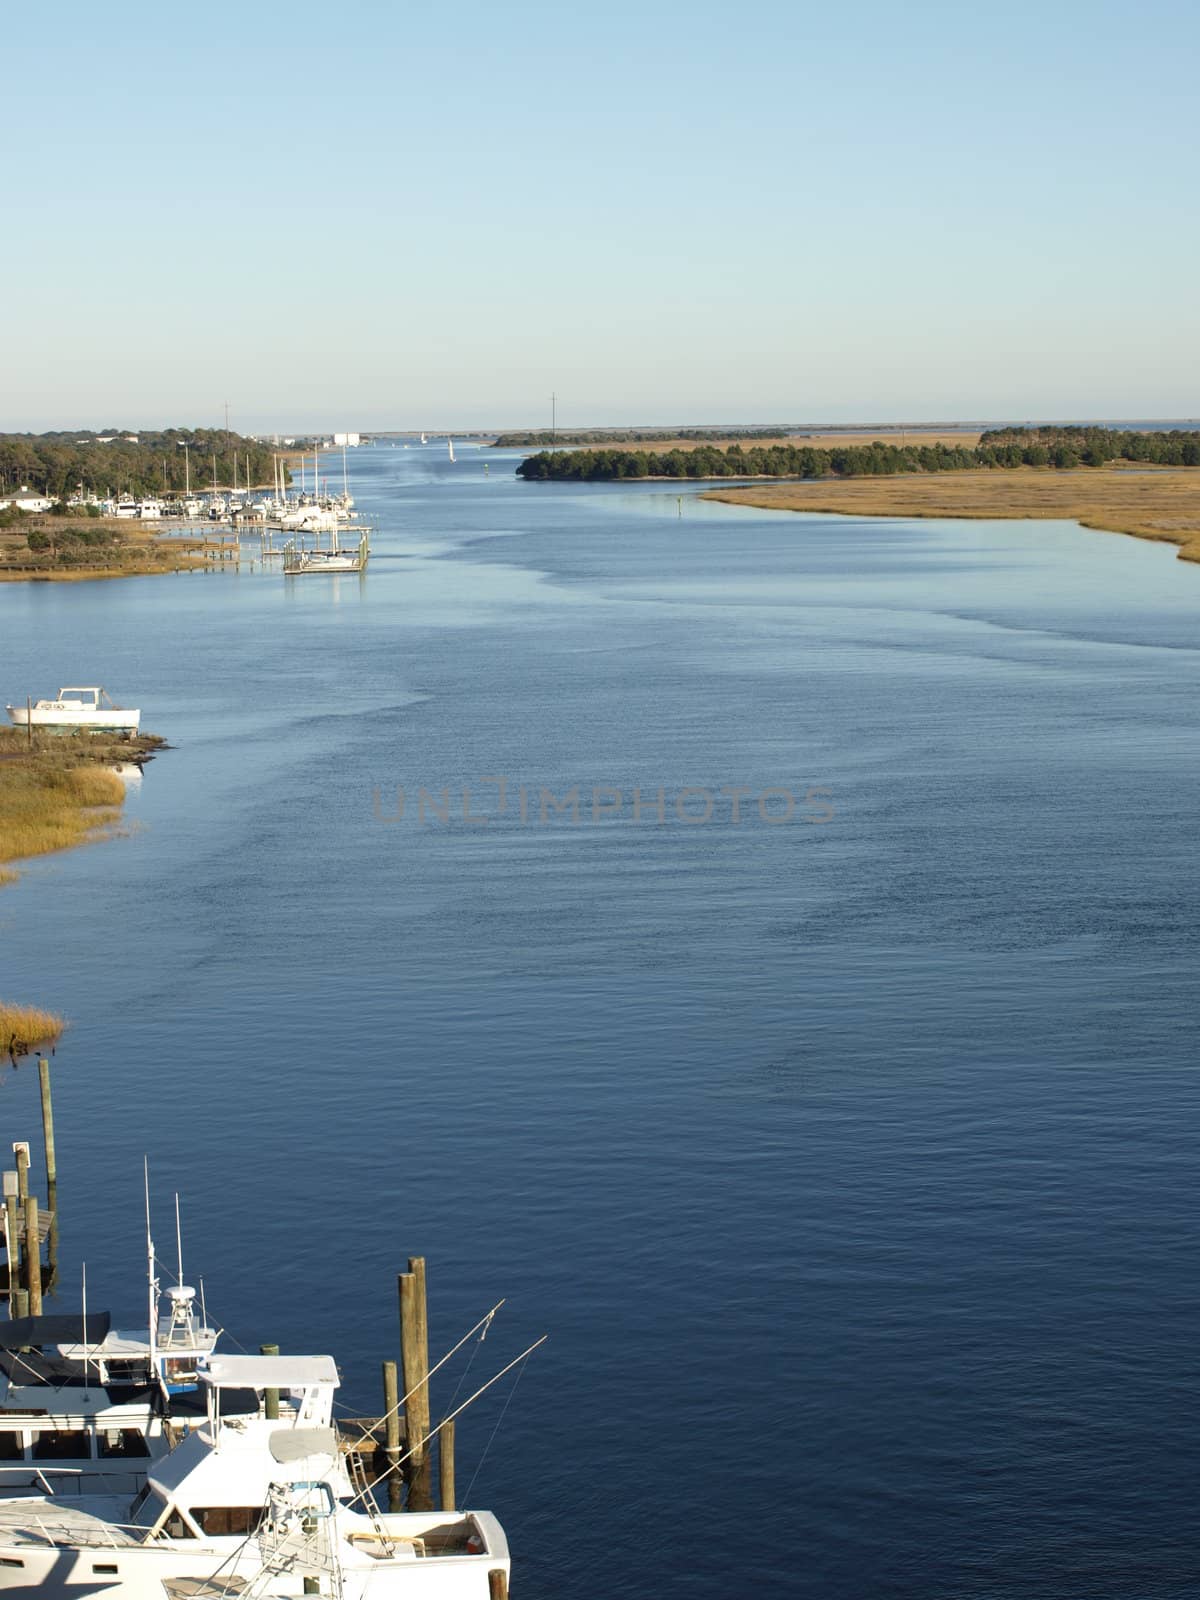 View of the boats along the intracoastal waterway from the Oak Osland Bridge